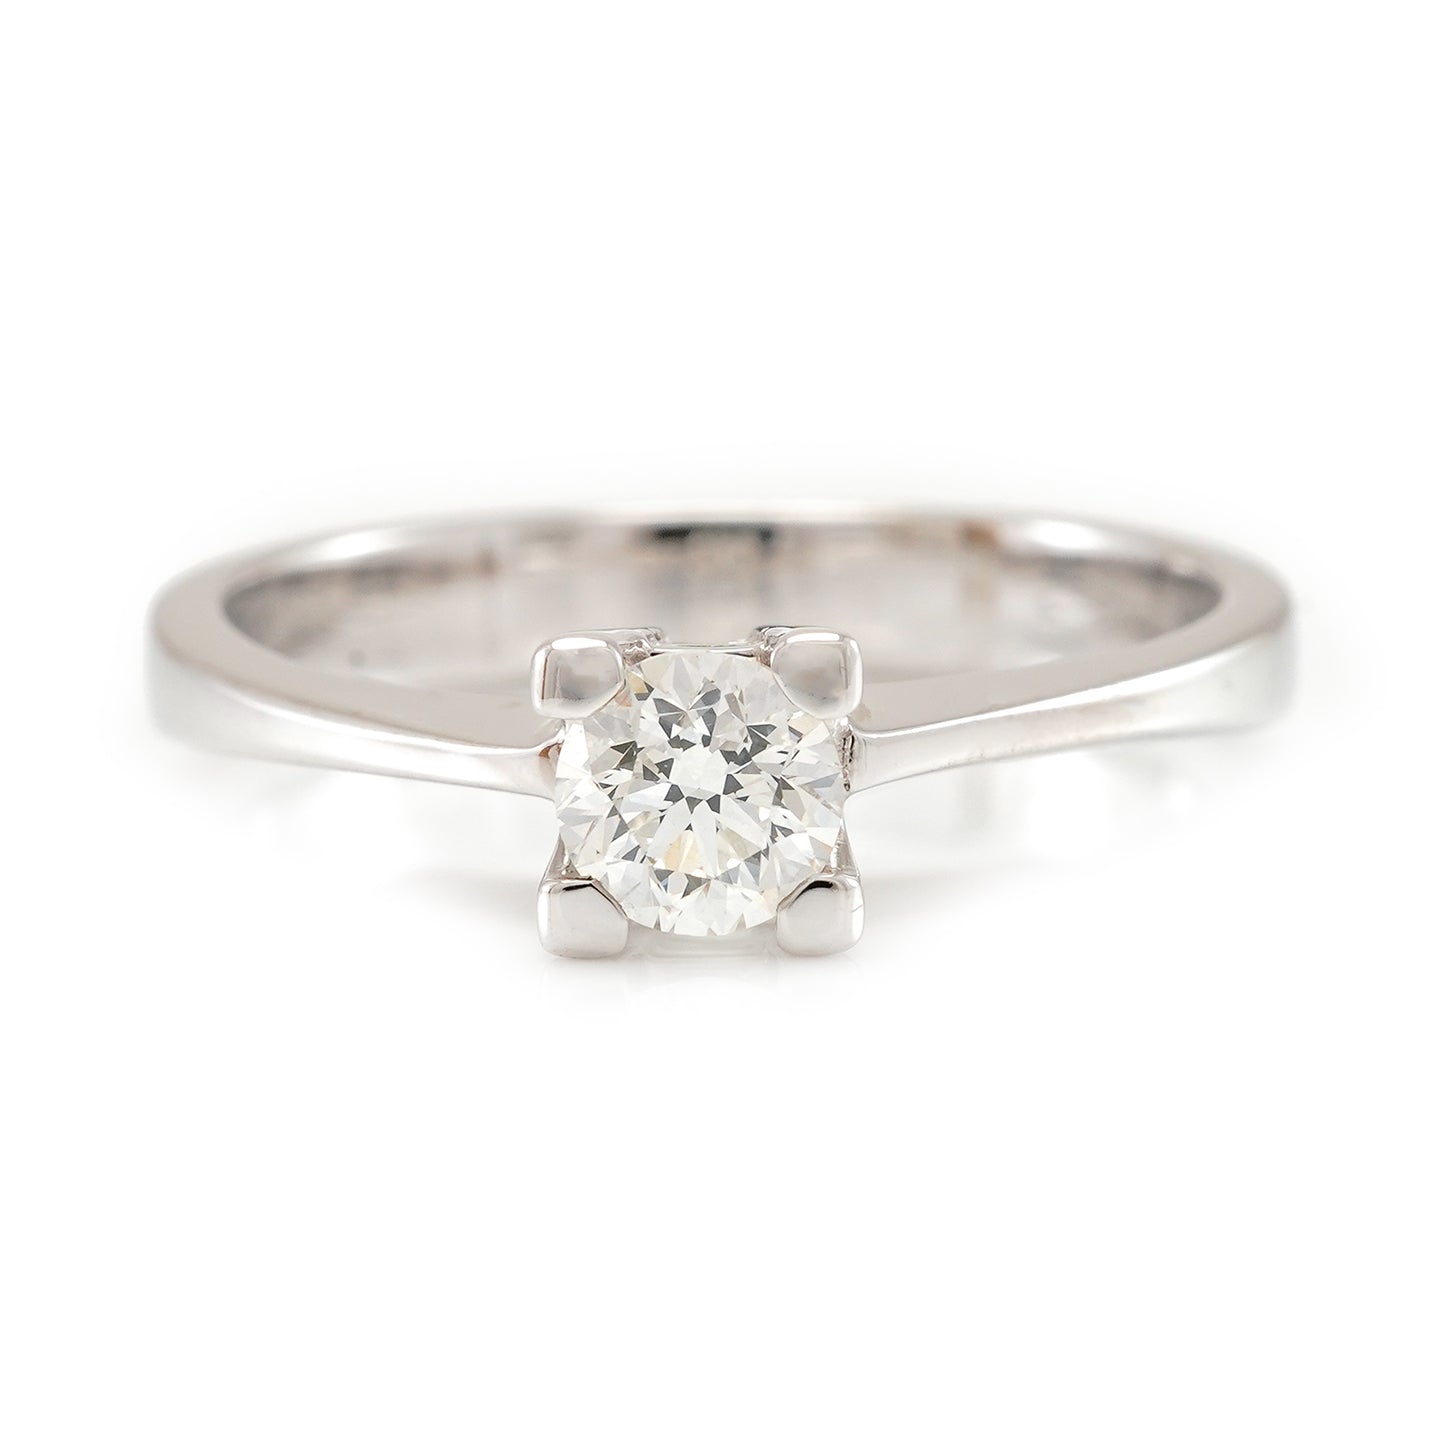 Engagement ring diamond ring 0.45 ct white gold 18K women's jewelry solitaire ring gold ring